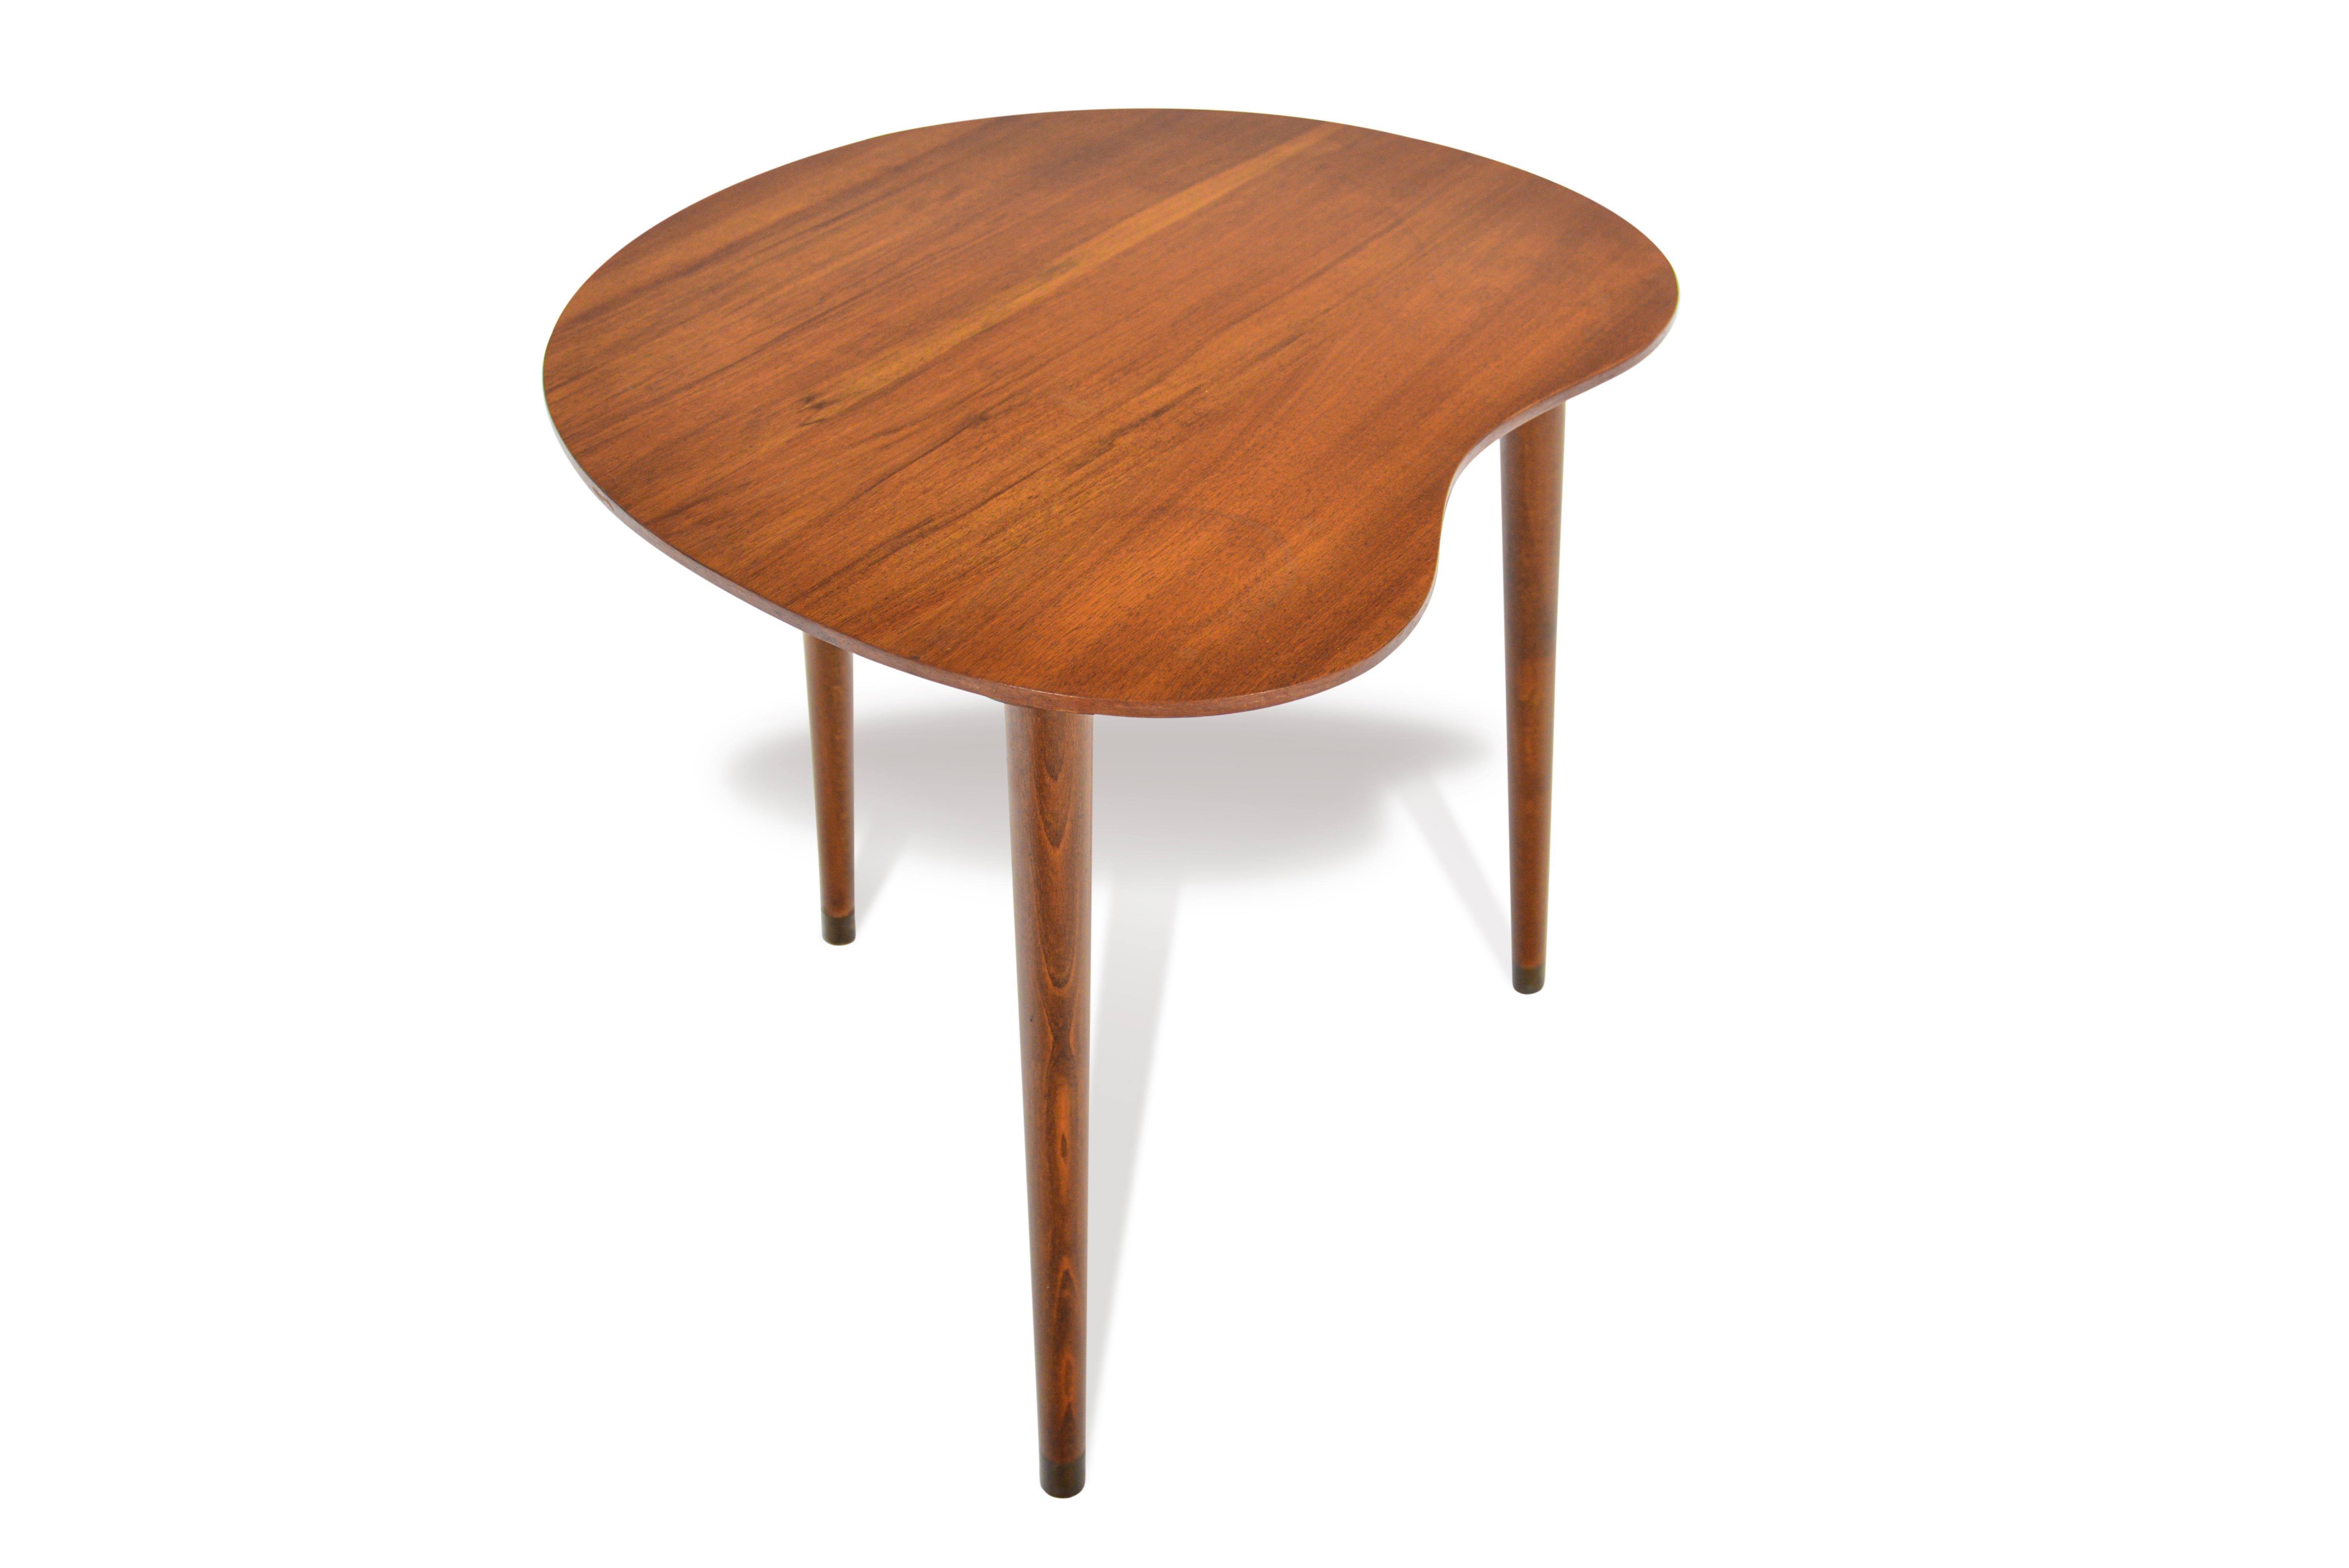 This Danish modern biomorphic shaped side table in elm is finished on all sides and offers organic lines. This rare find is a perfect companion piece for any lounge chair, sofa, or bedside. In excellent vintage condition.

  